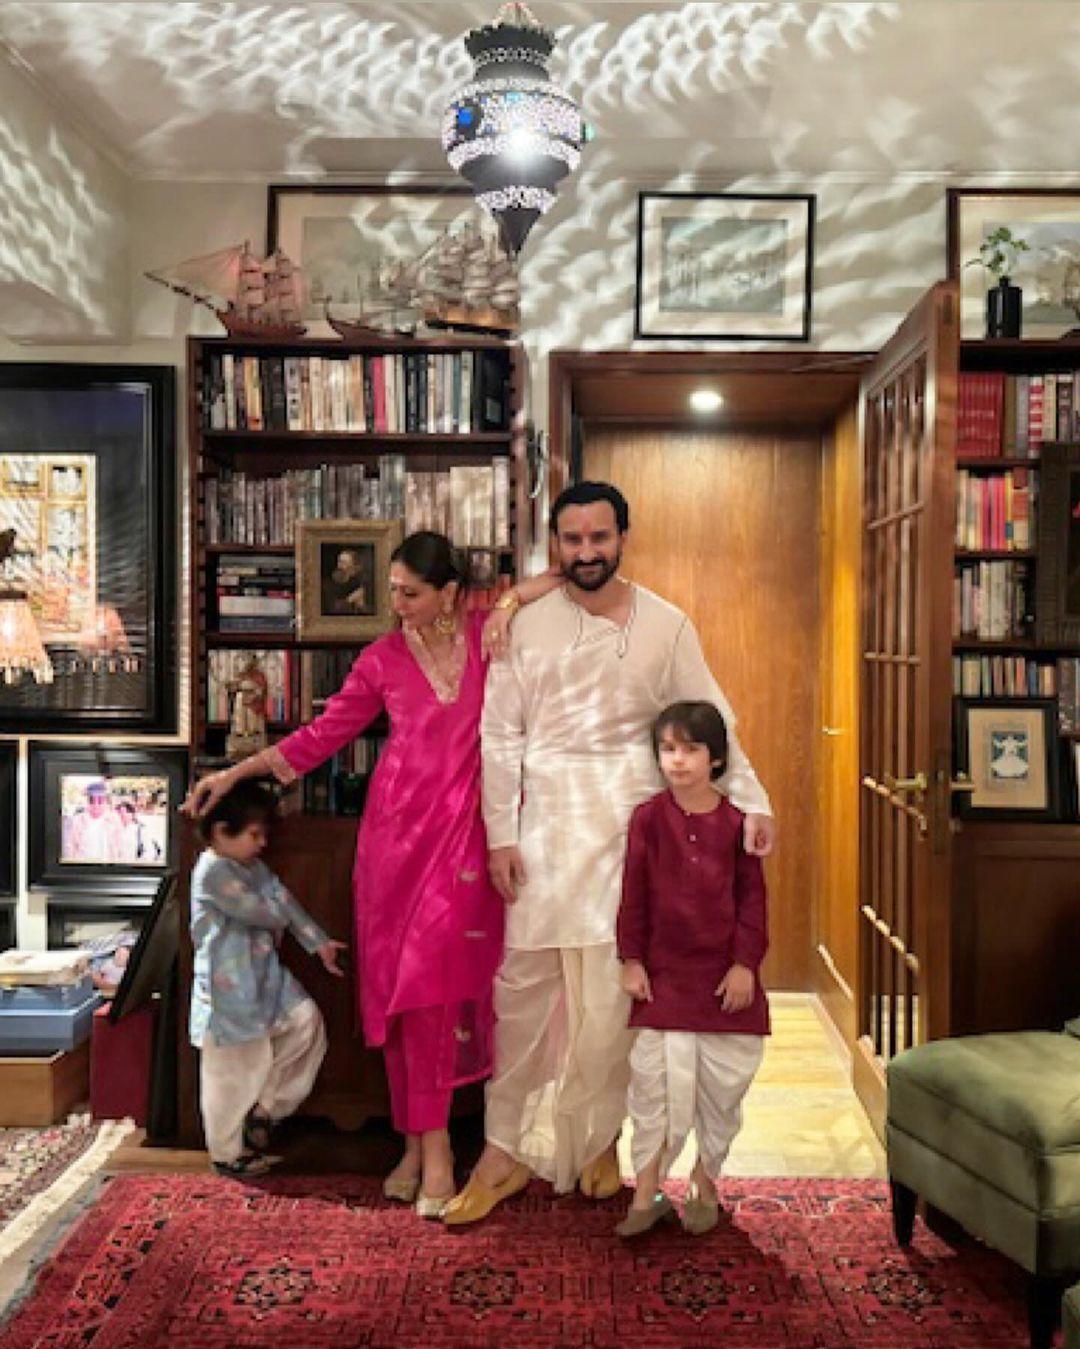 Kareena Kapoor, a doting mother of two - Jeh Ali Khan and Taimur, welcomed her second child in February 2021. The actress was 40 years old when she gave birth to her second child, and throughout her pregnancy, Kareena worked a lot